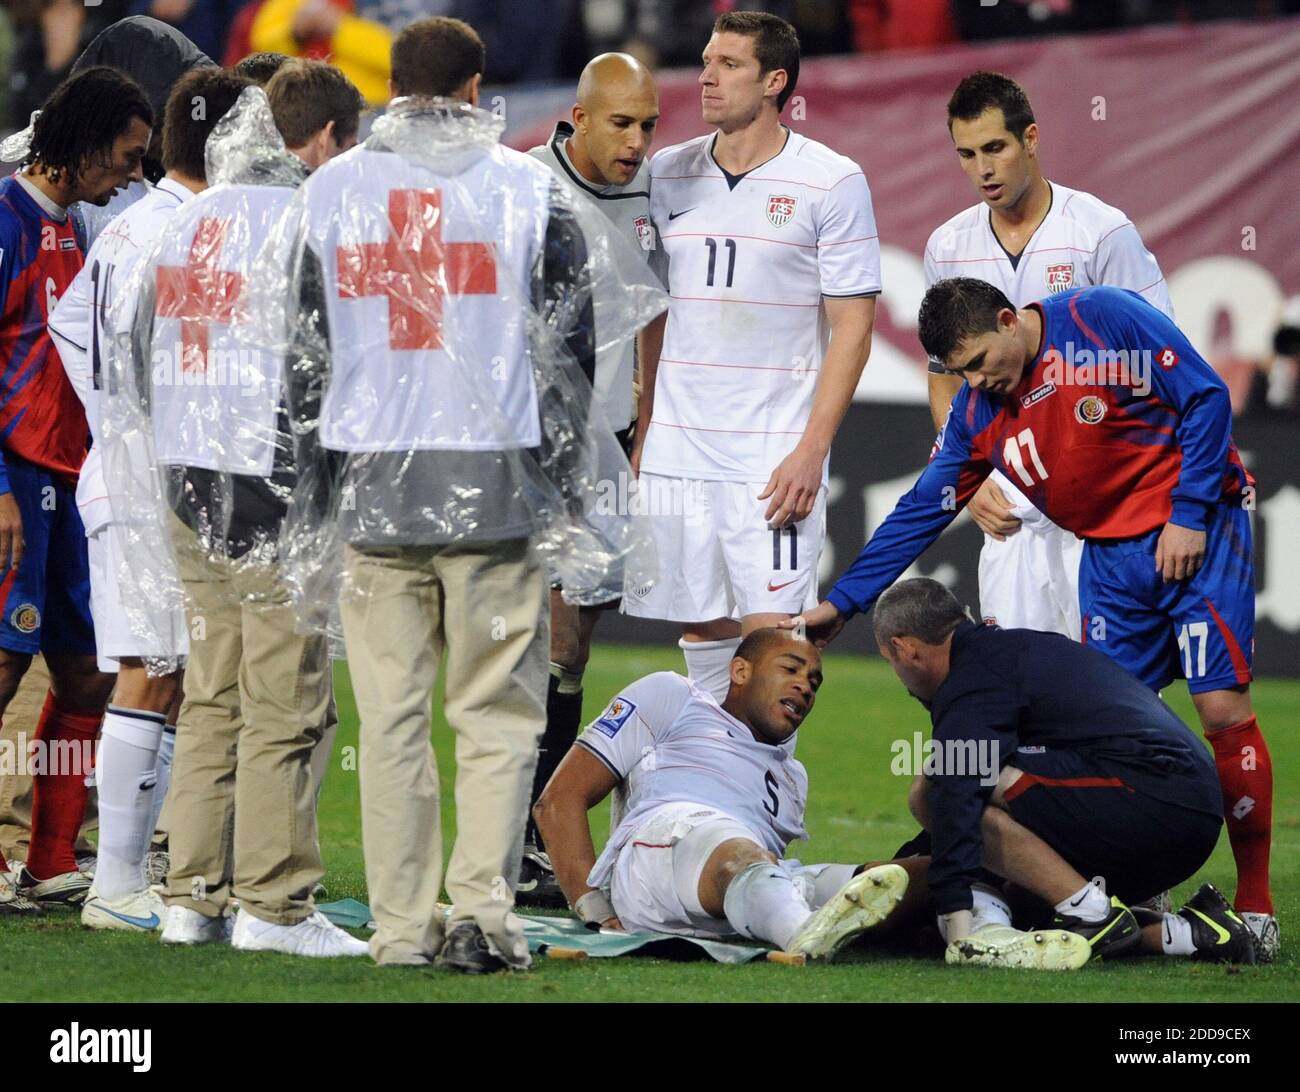 NO FILM, NO VIDEO, NO TV, NO DOCUMENTARY - USA defender Oguchi Onyewu (5) sits on the pitch surrounded by teammates, members of Costa Rica team and first aid officials, after suffering a torn tendon in his left during World Cup qualifier Soccer Match, USA vs Costa Rica at RFK Stadium in Washington, DC, USA on October 14, 2009. The match ended in a 2-2 draw.Photo by Chuck Myers/MCT/ABACAPRESS.COM Stock Photo